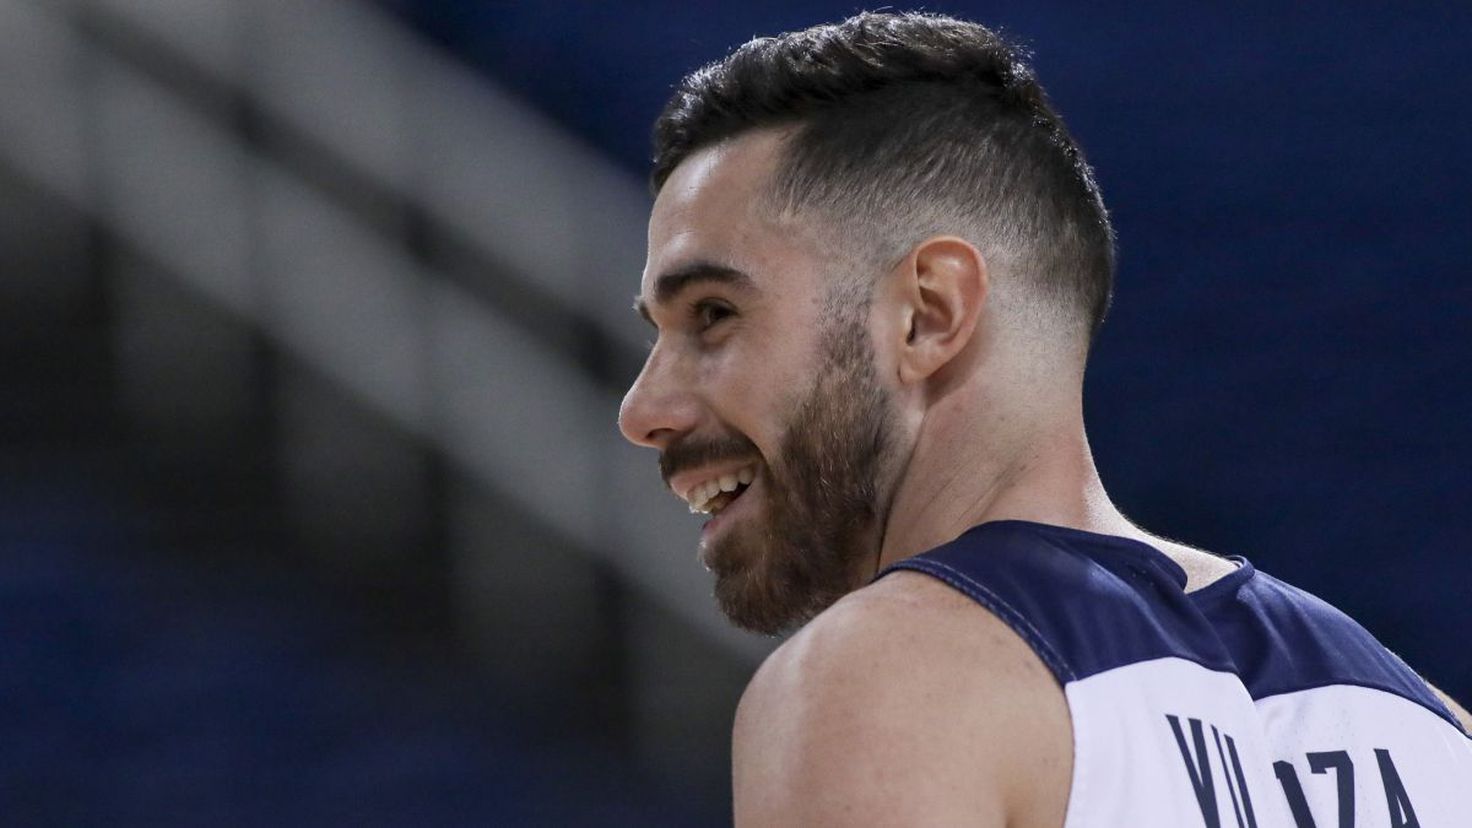 Luca Vildoza and Baskonia meet in court
